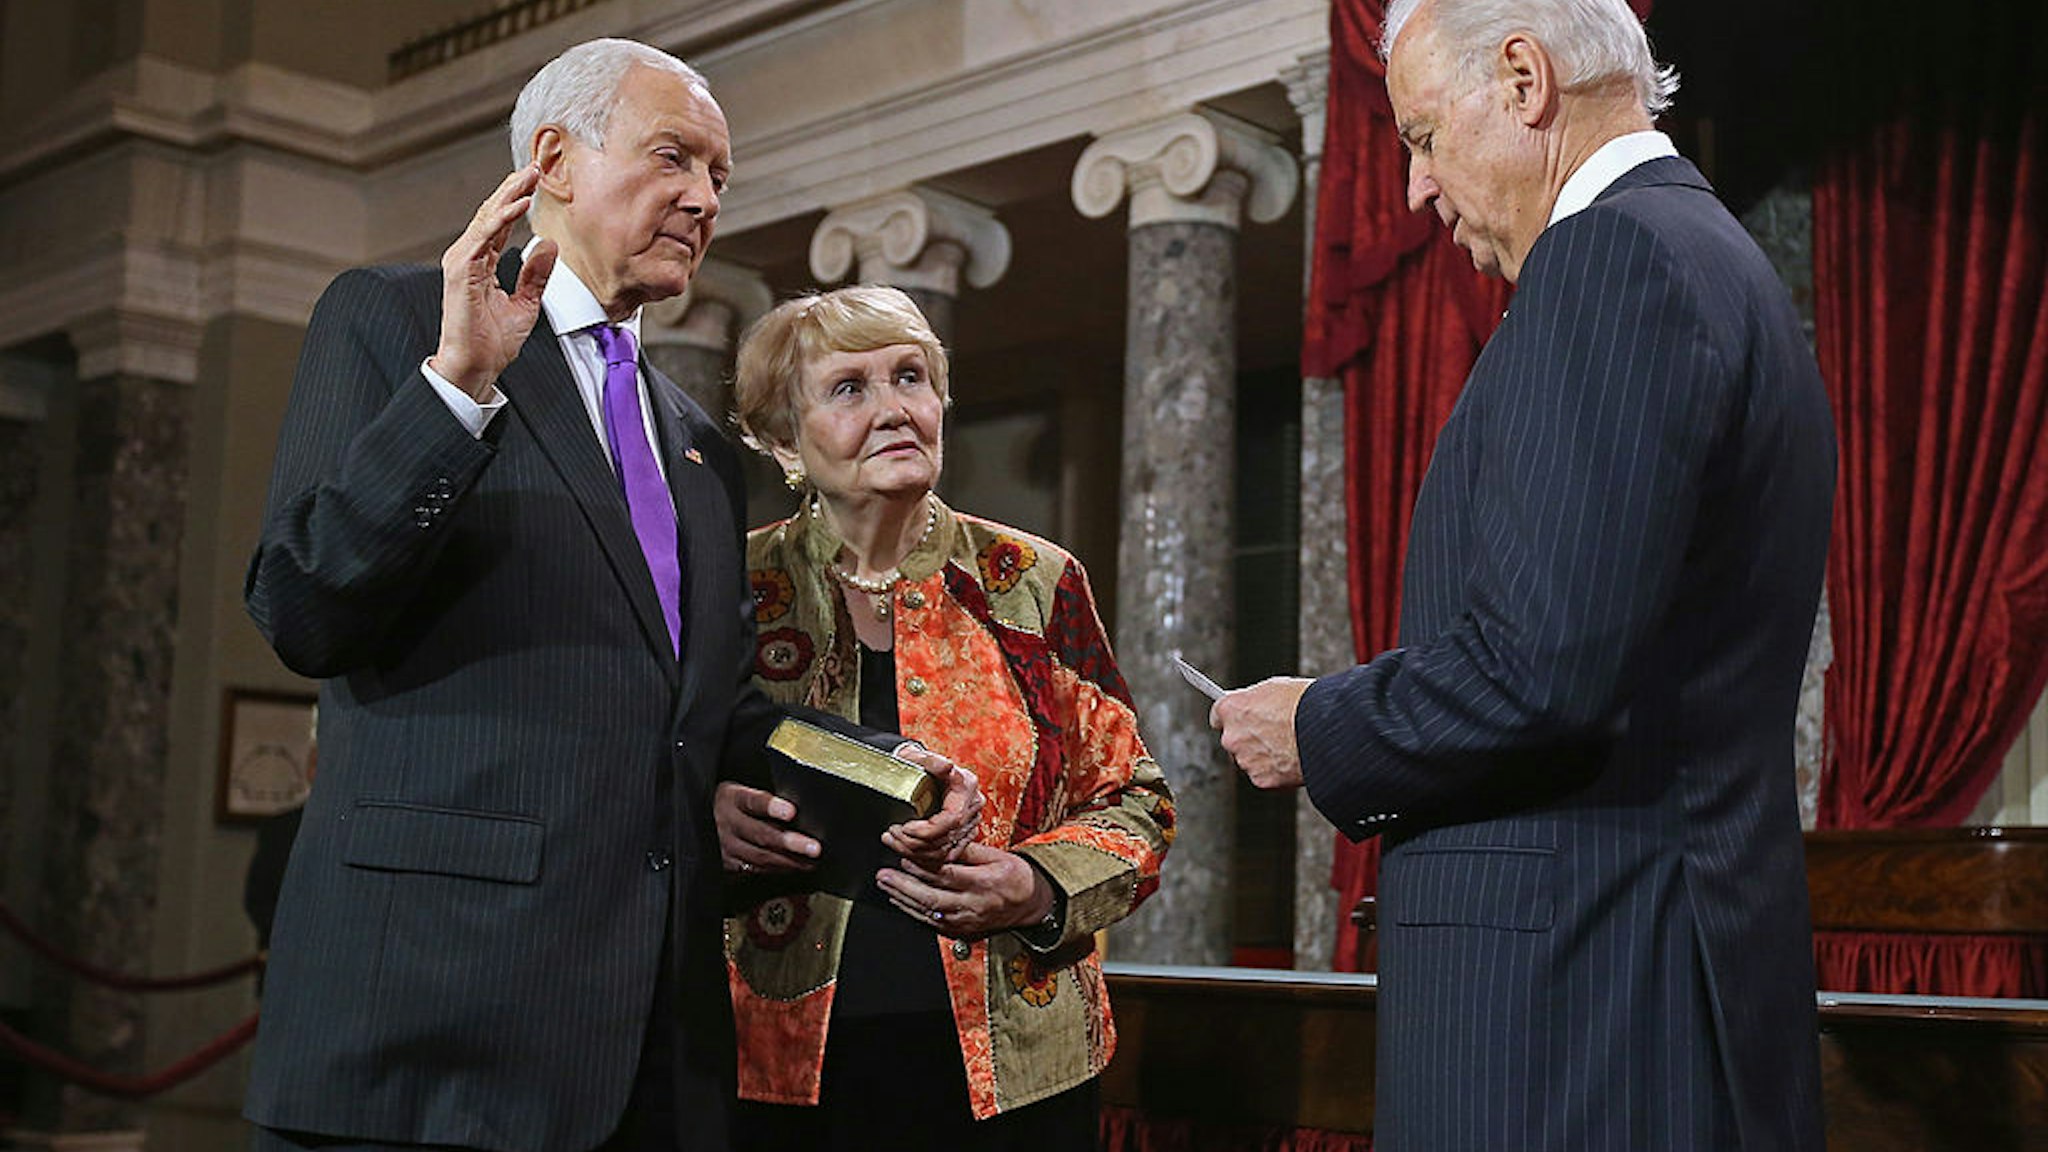 WASHINGTON, DC - JANUARY 03: U.S. Sen. Orrin Hatch (R-UT) (L) participates in a reenacted swearing-in with his wife Elaine Hatch and U.S. Vice President Joe Biden in the Old Senate Chamber at the U.S. Capitol January 3, 2013 in Washington, DC. Biden swore in the newly-elected and re-elected senators earlier in the day on the floor of the current Senate chamber. (Photo by Chip Somodevilla/Getty Images)